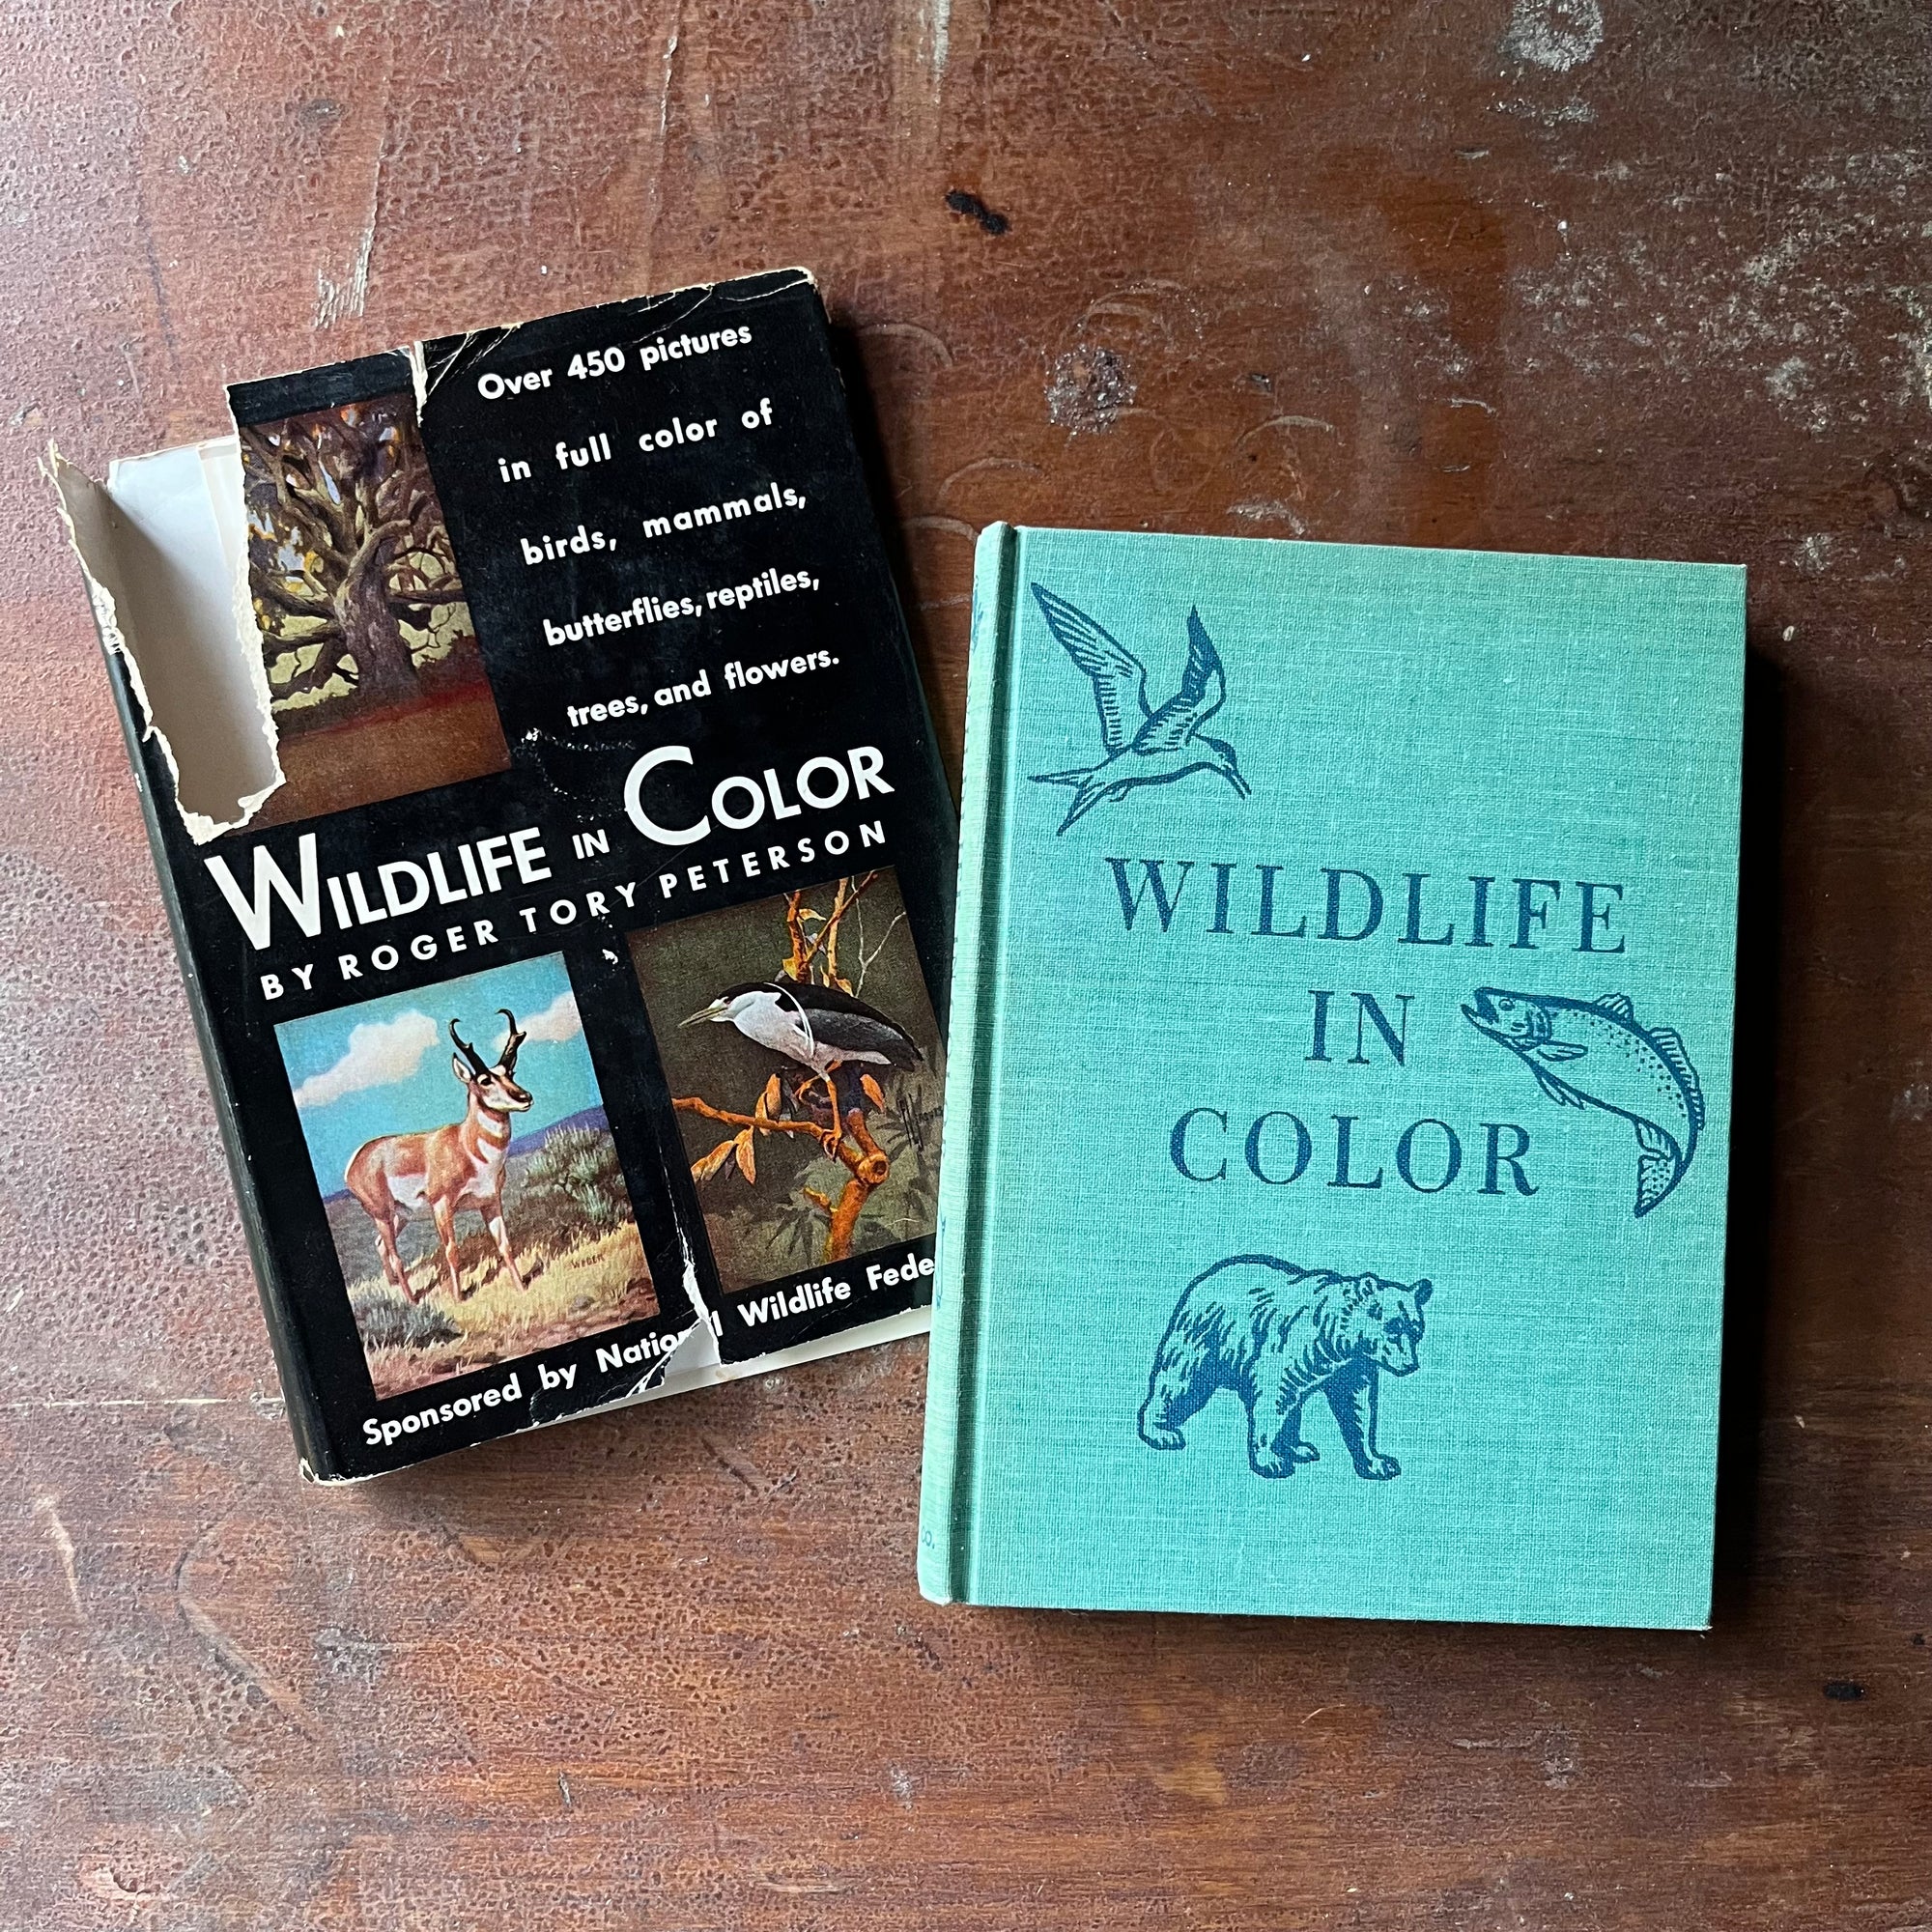 vintage nature guide - Wildlife in Color written & illustrated (includes other illustrators as well) by Roger Tory Peterson - sponsored by National Wildlife Federation - view of the front cover with title in the middle & three illustrations surrounding the title - a bird, fish & a bear - all drawn by Peterson - the dust jacket is tucked behind the book